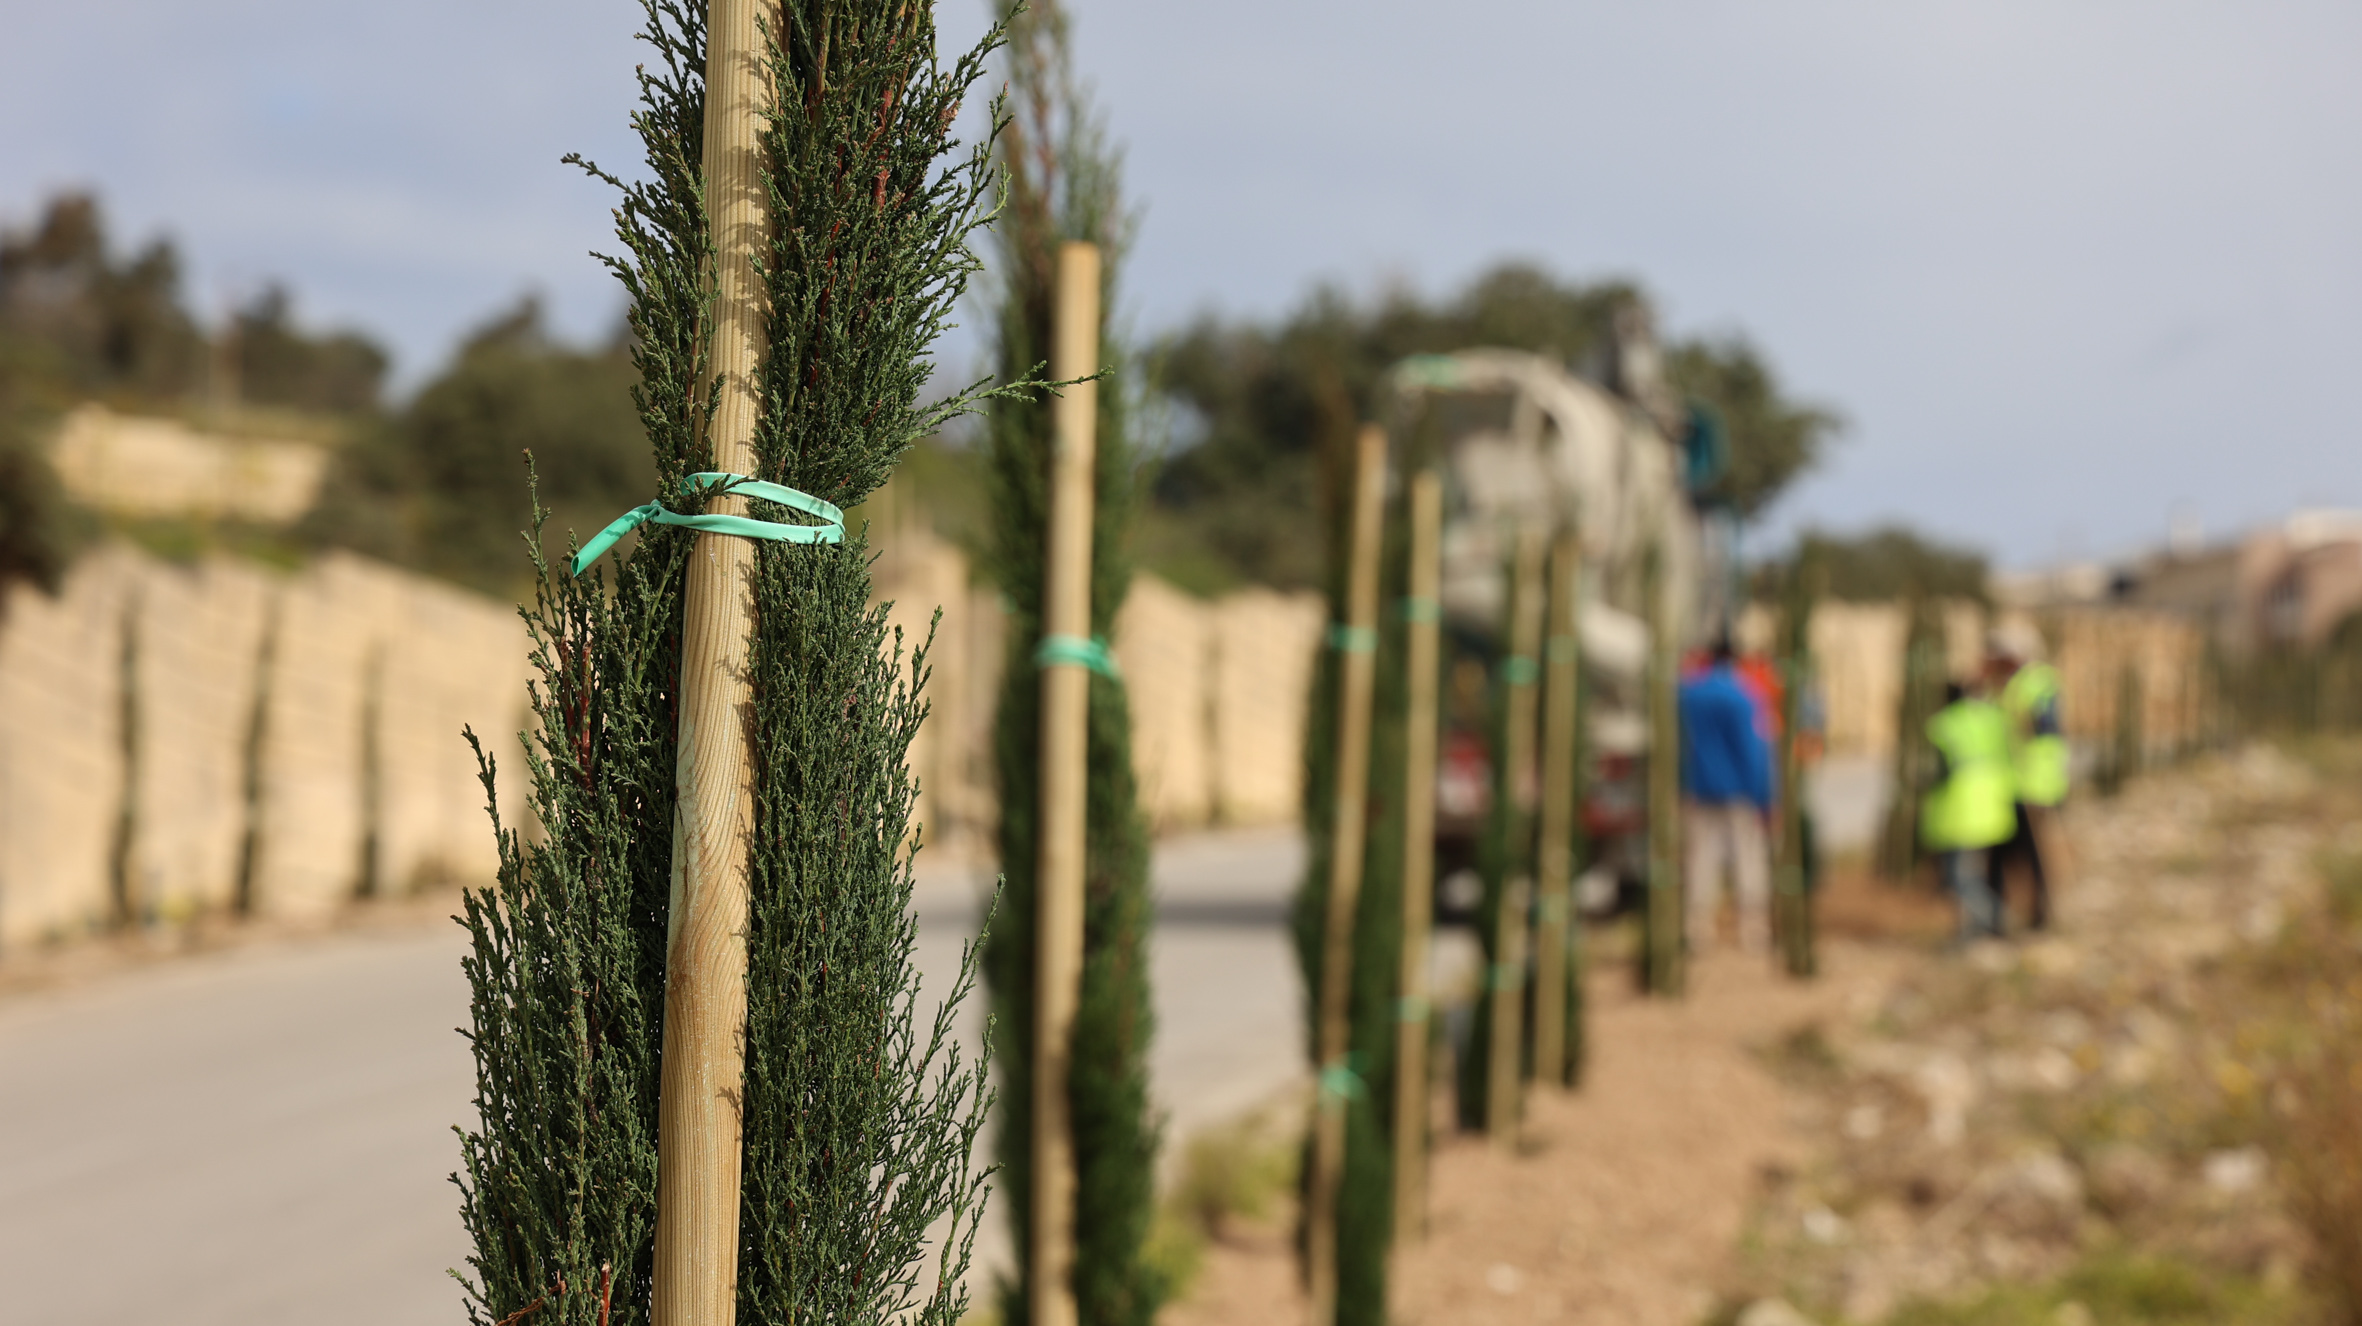 Infrastructure Malta planting 9908 trees in three months